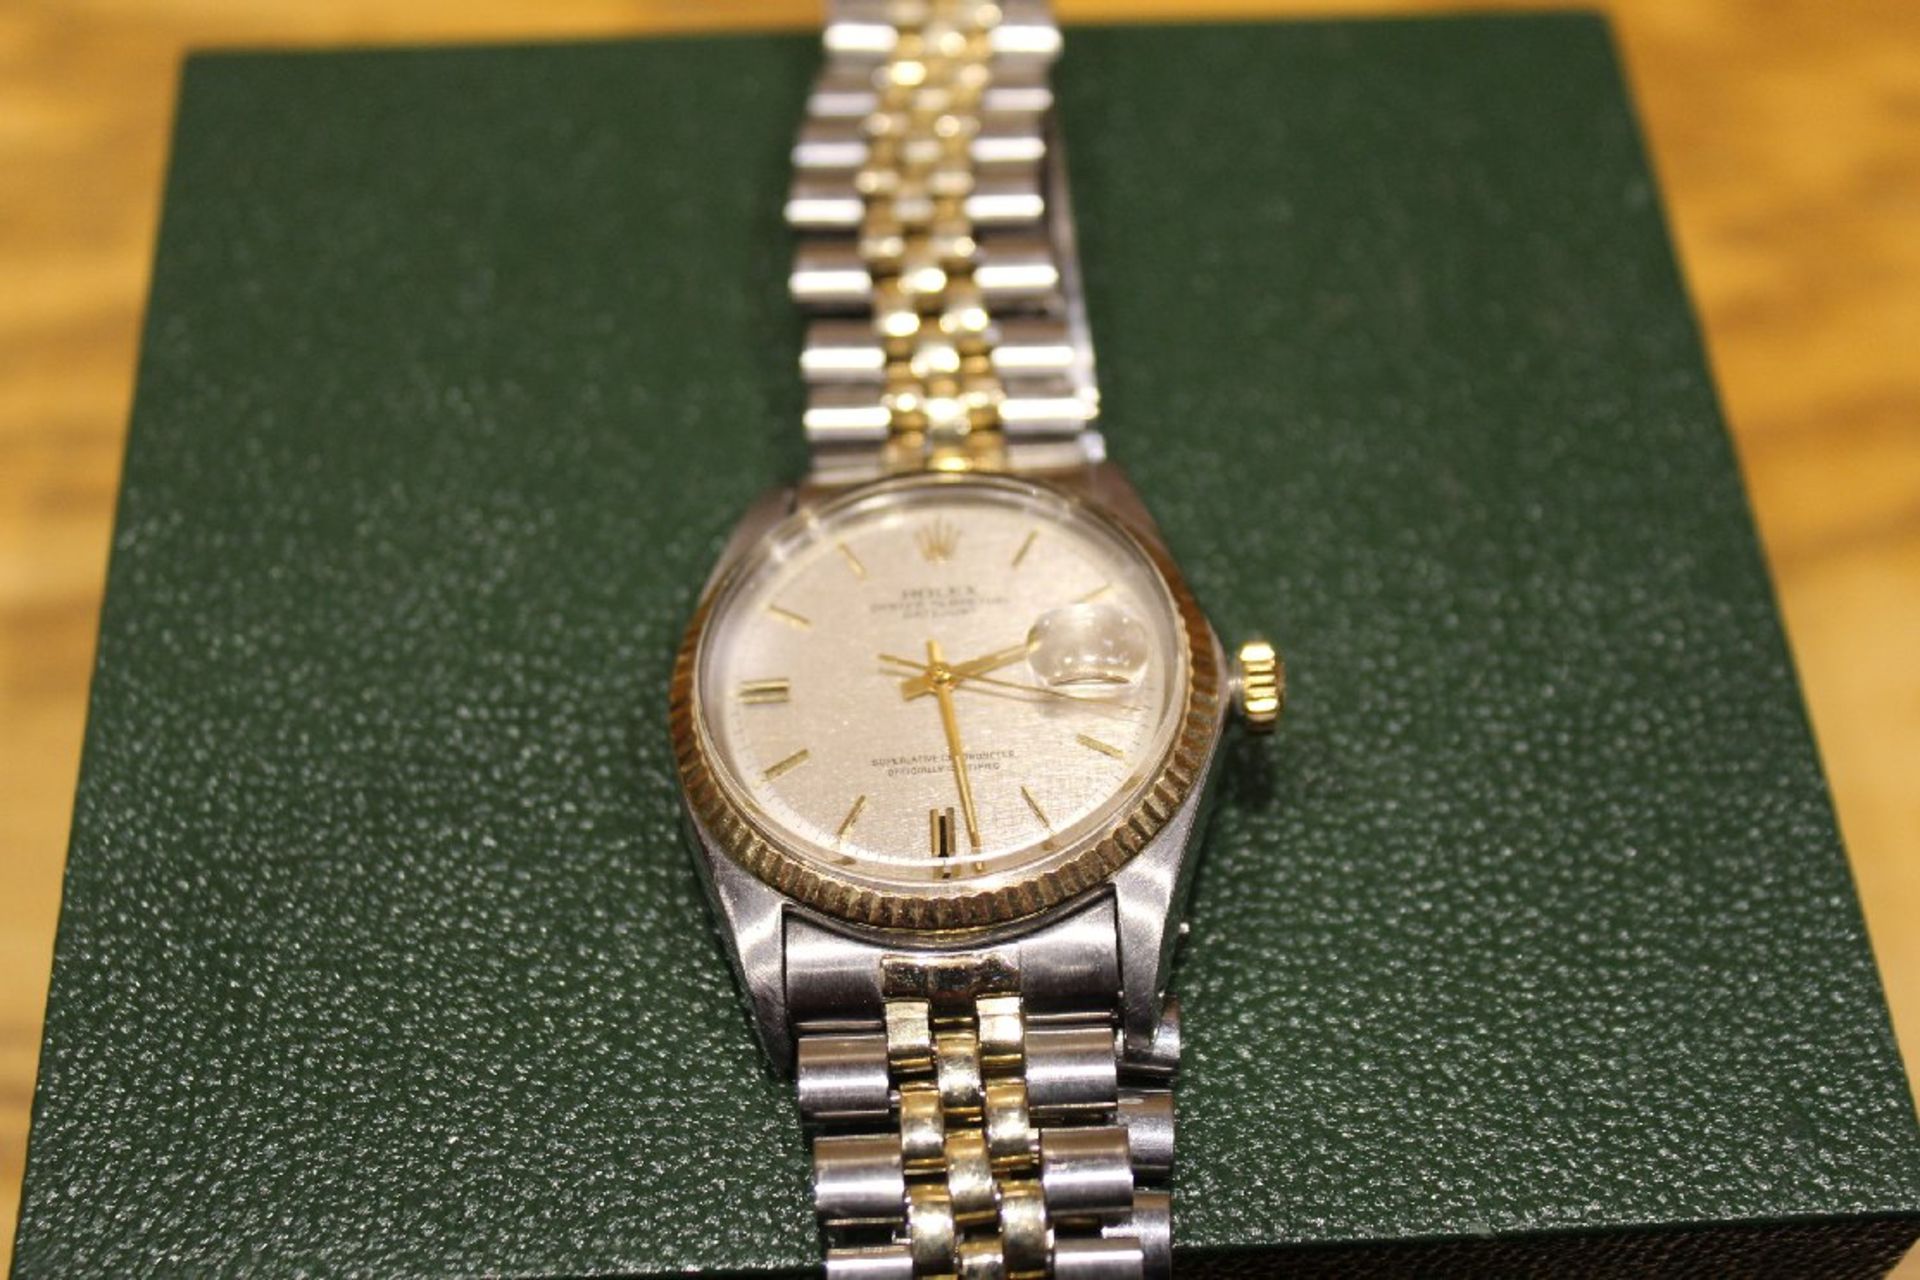 Rolex Oyster Watch. Sterling Silver & 14kt Yellow Gold. SN 2221498 - Purchased in 1971 - Image 2 of 7